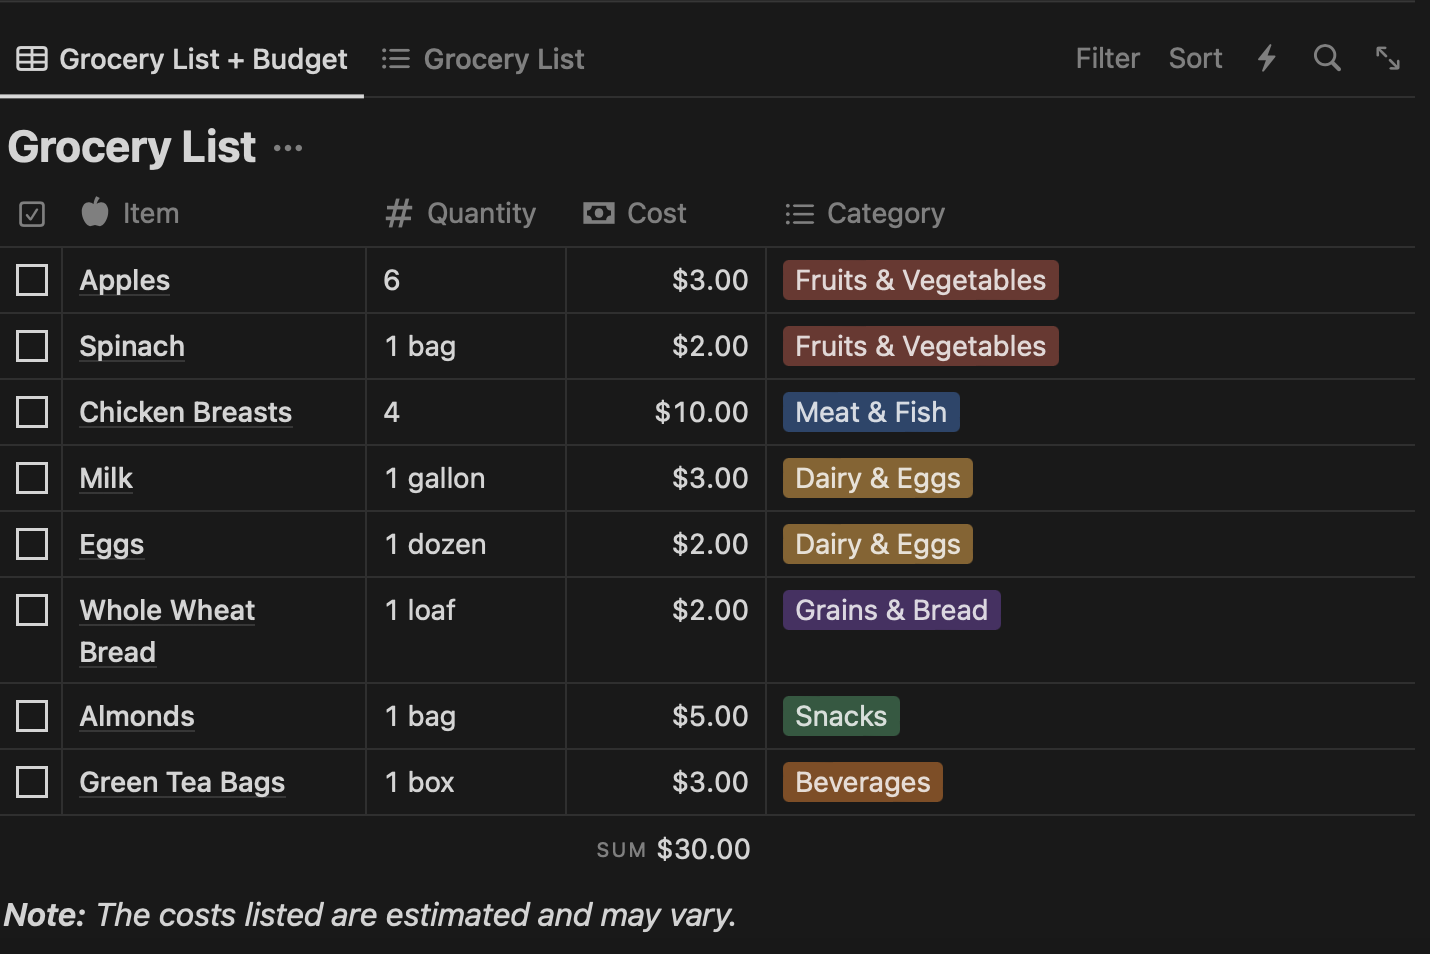 This meal planner and grocery list is a convenient tool that can help users organize their meals for the week ahead. It also complies a grocery list that is organized by category and quantity, to also include the ability to total the cost for efficient, budget-friendly shopping. 